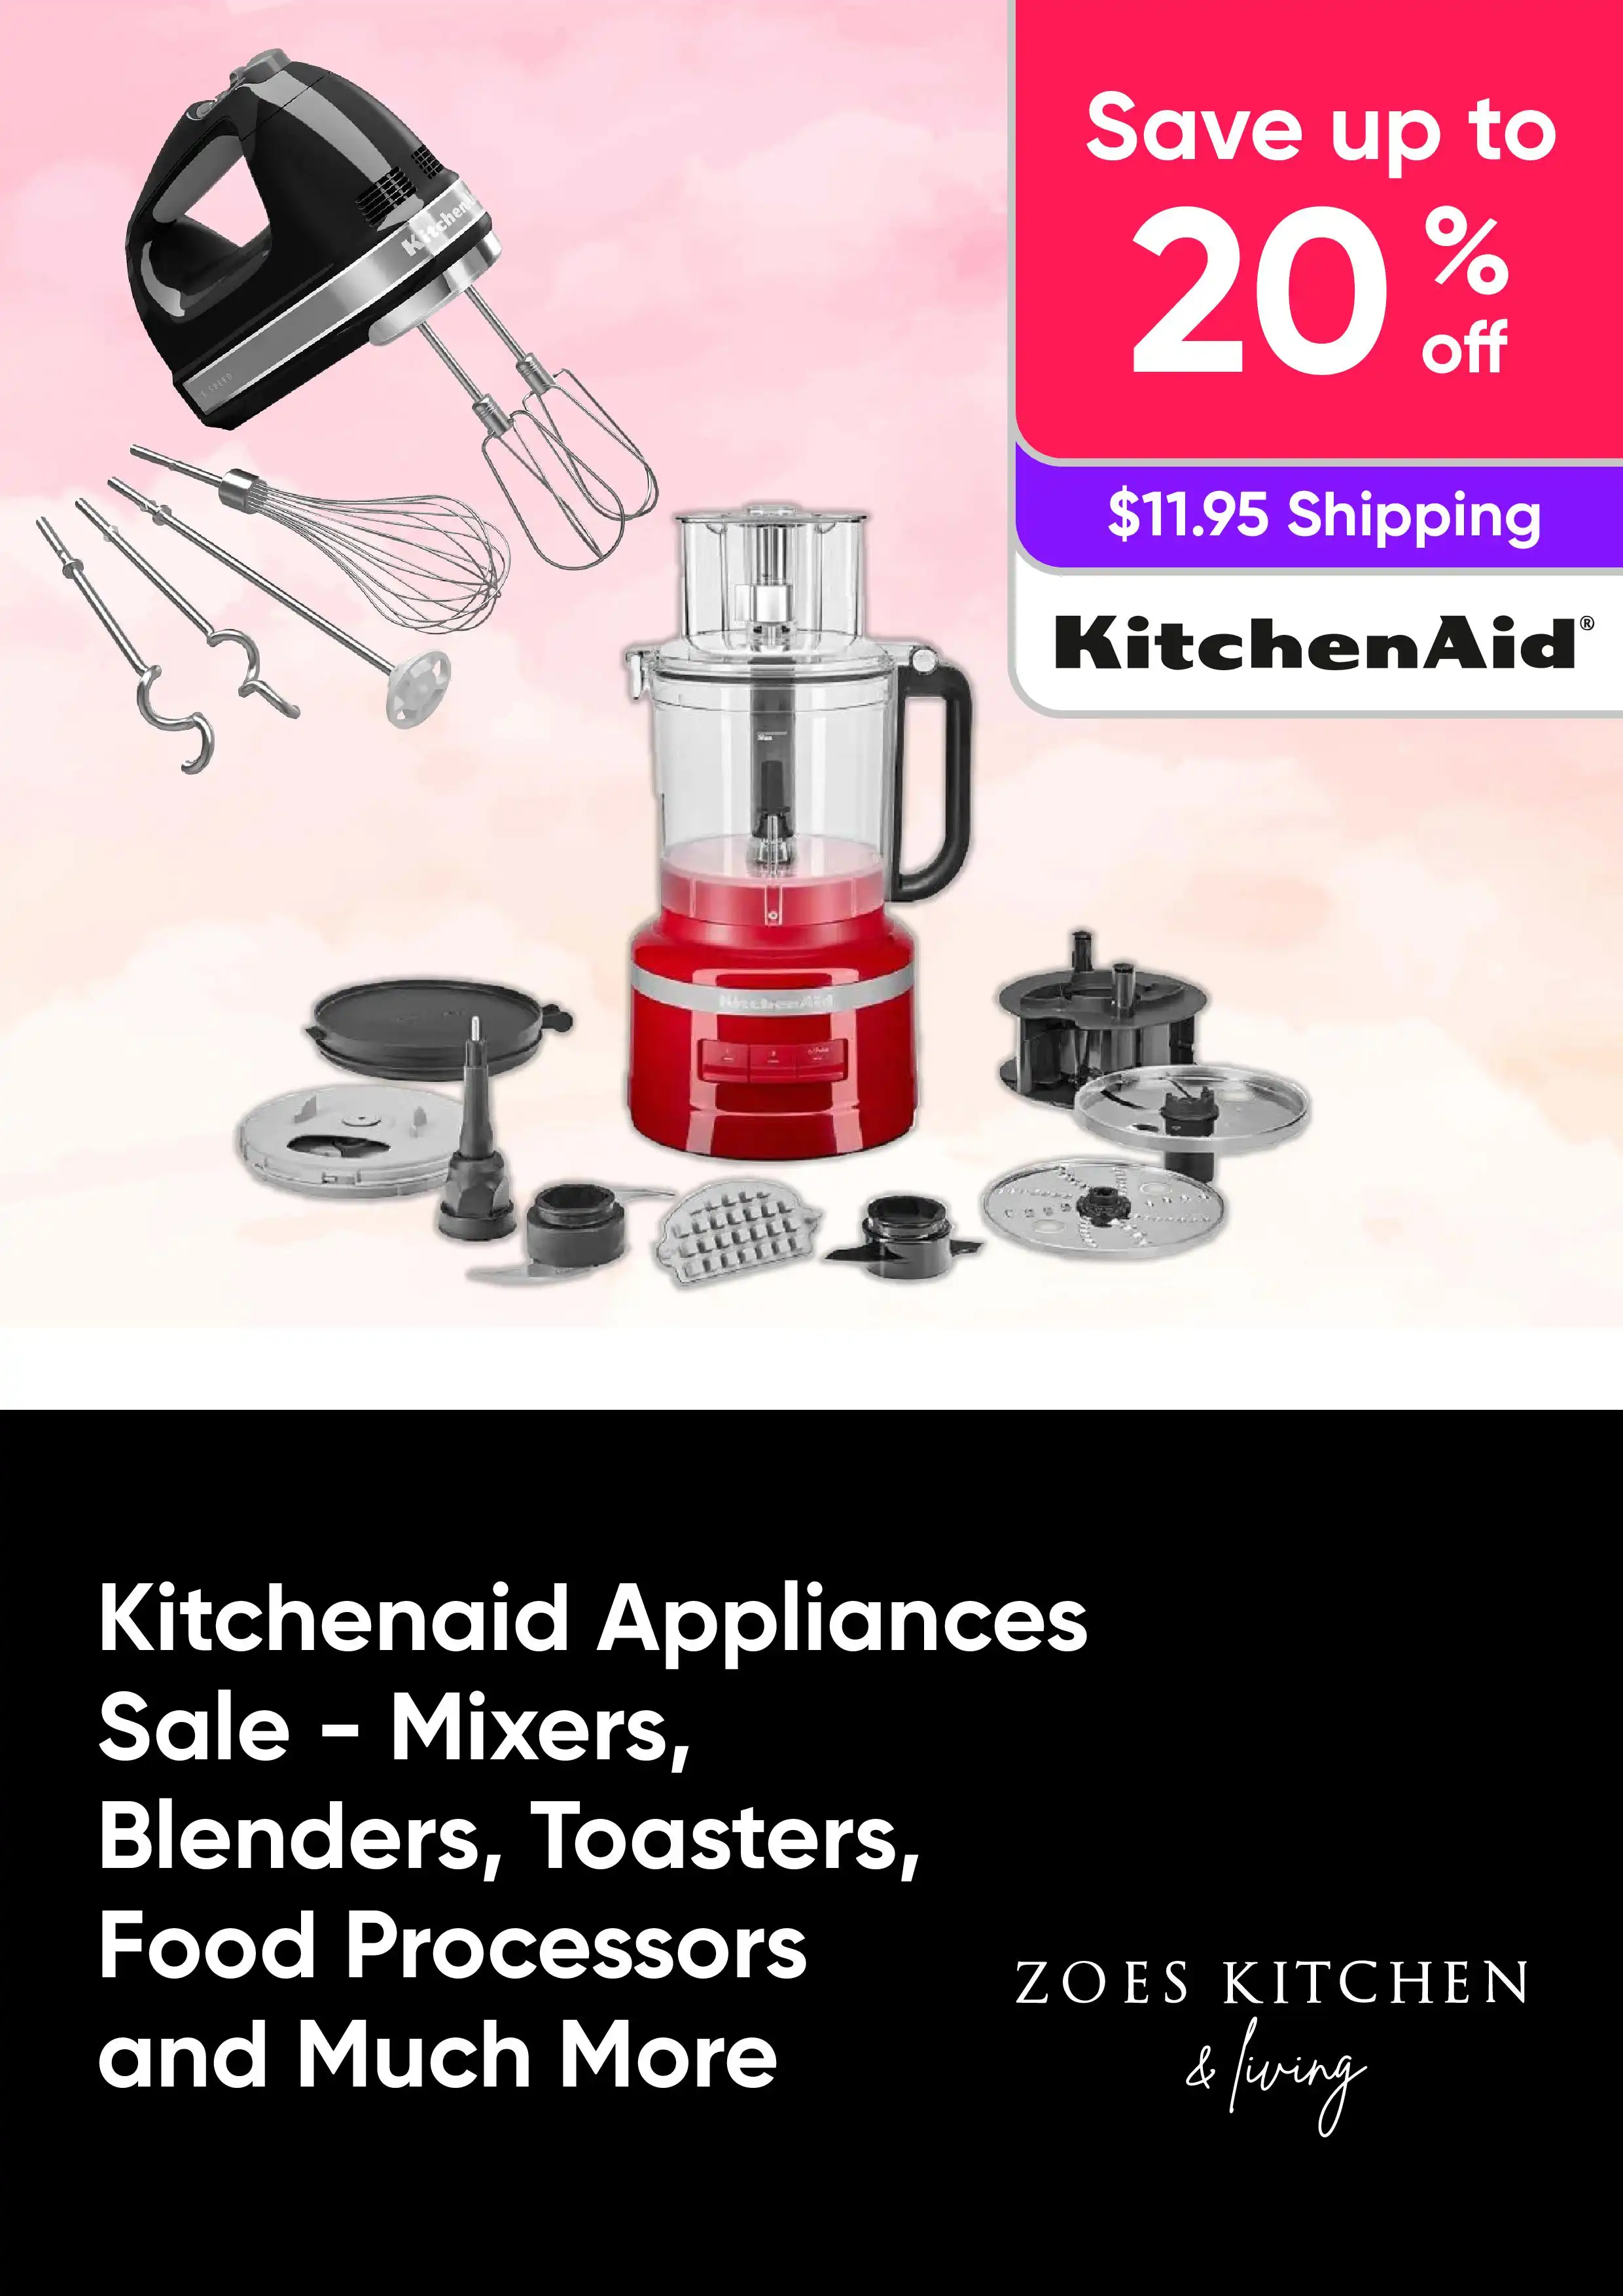 Kitchenaid Appliances Up to 20% Off RRP - Shop Mixers, Blenders, Toasters